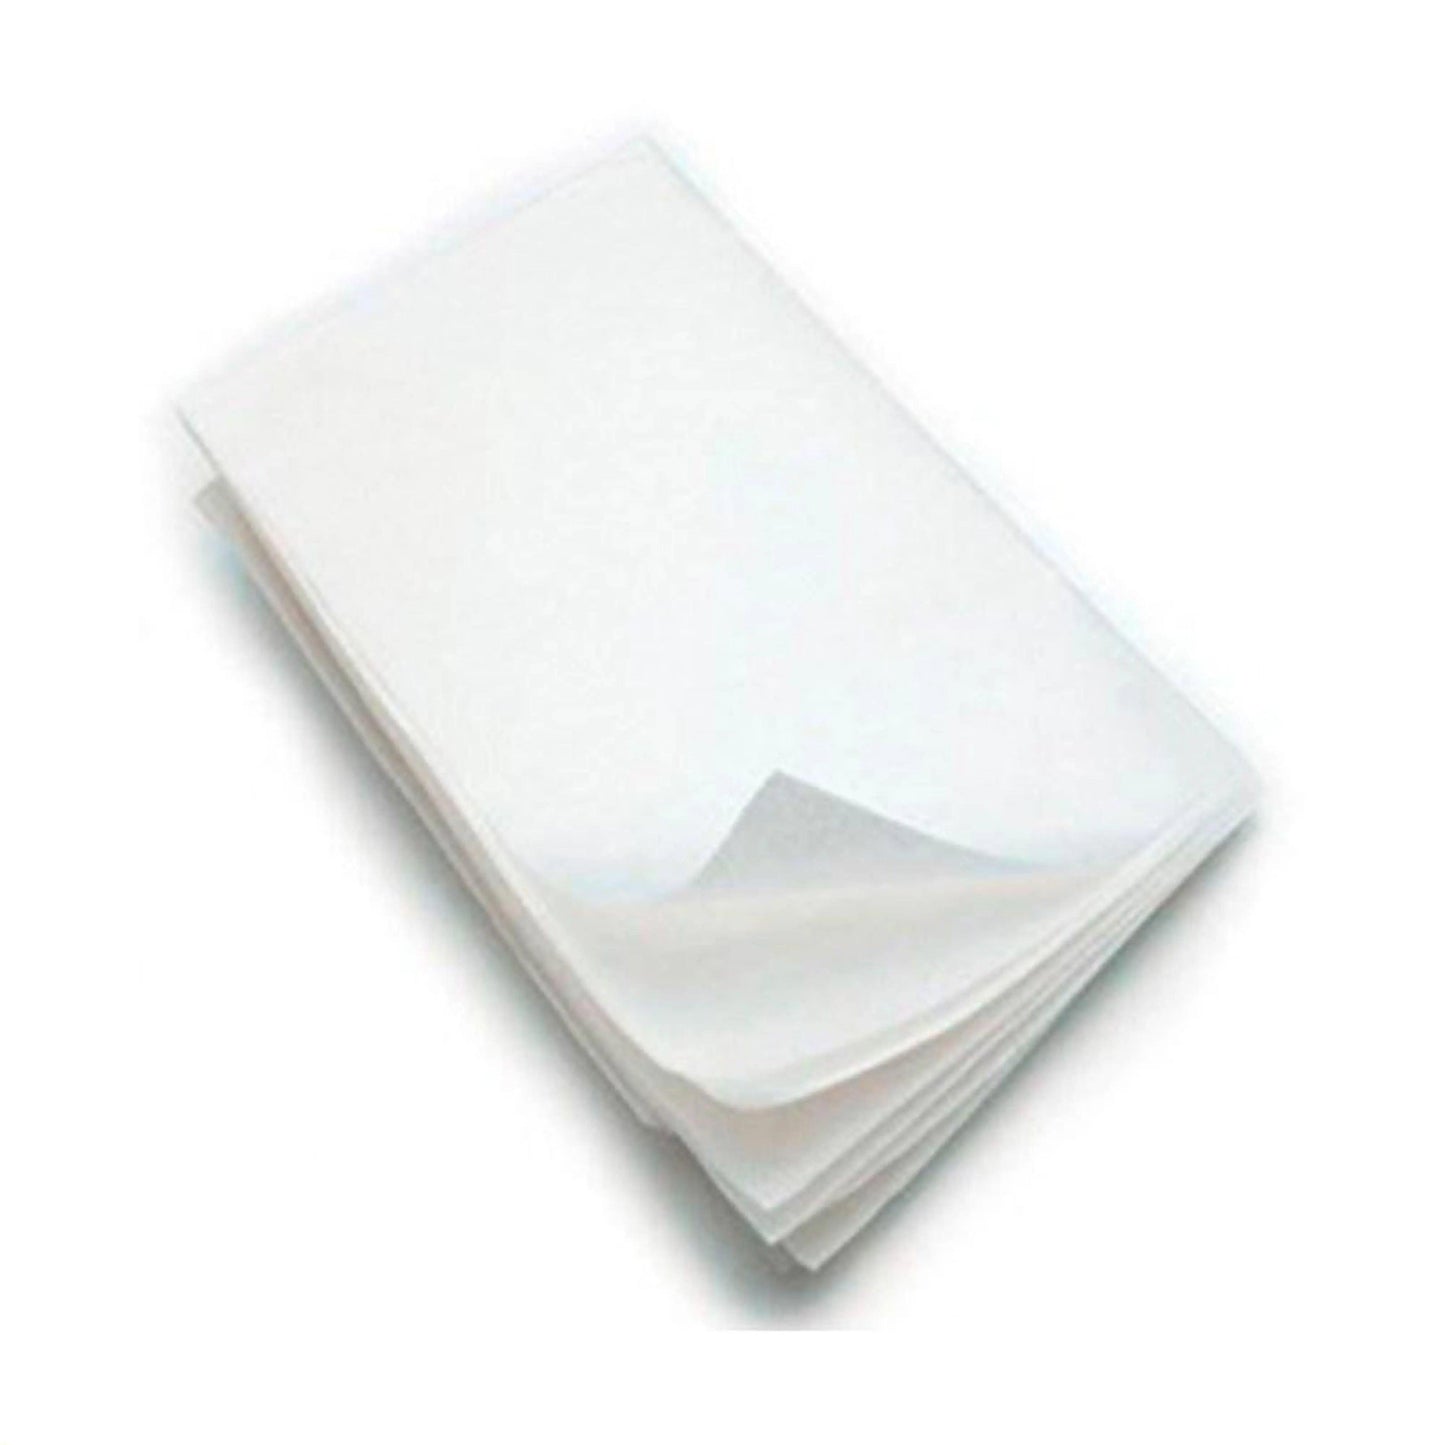 Plain Butter Paper/ Parchment Paper - Pack of 10 The Stationers